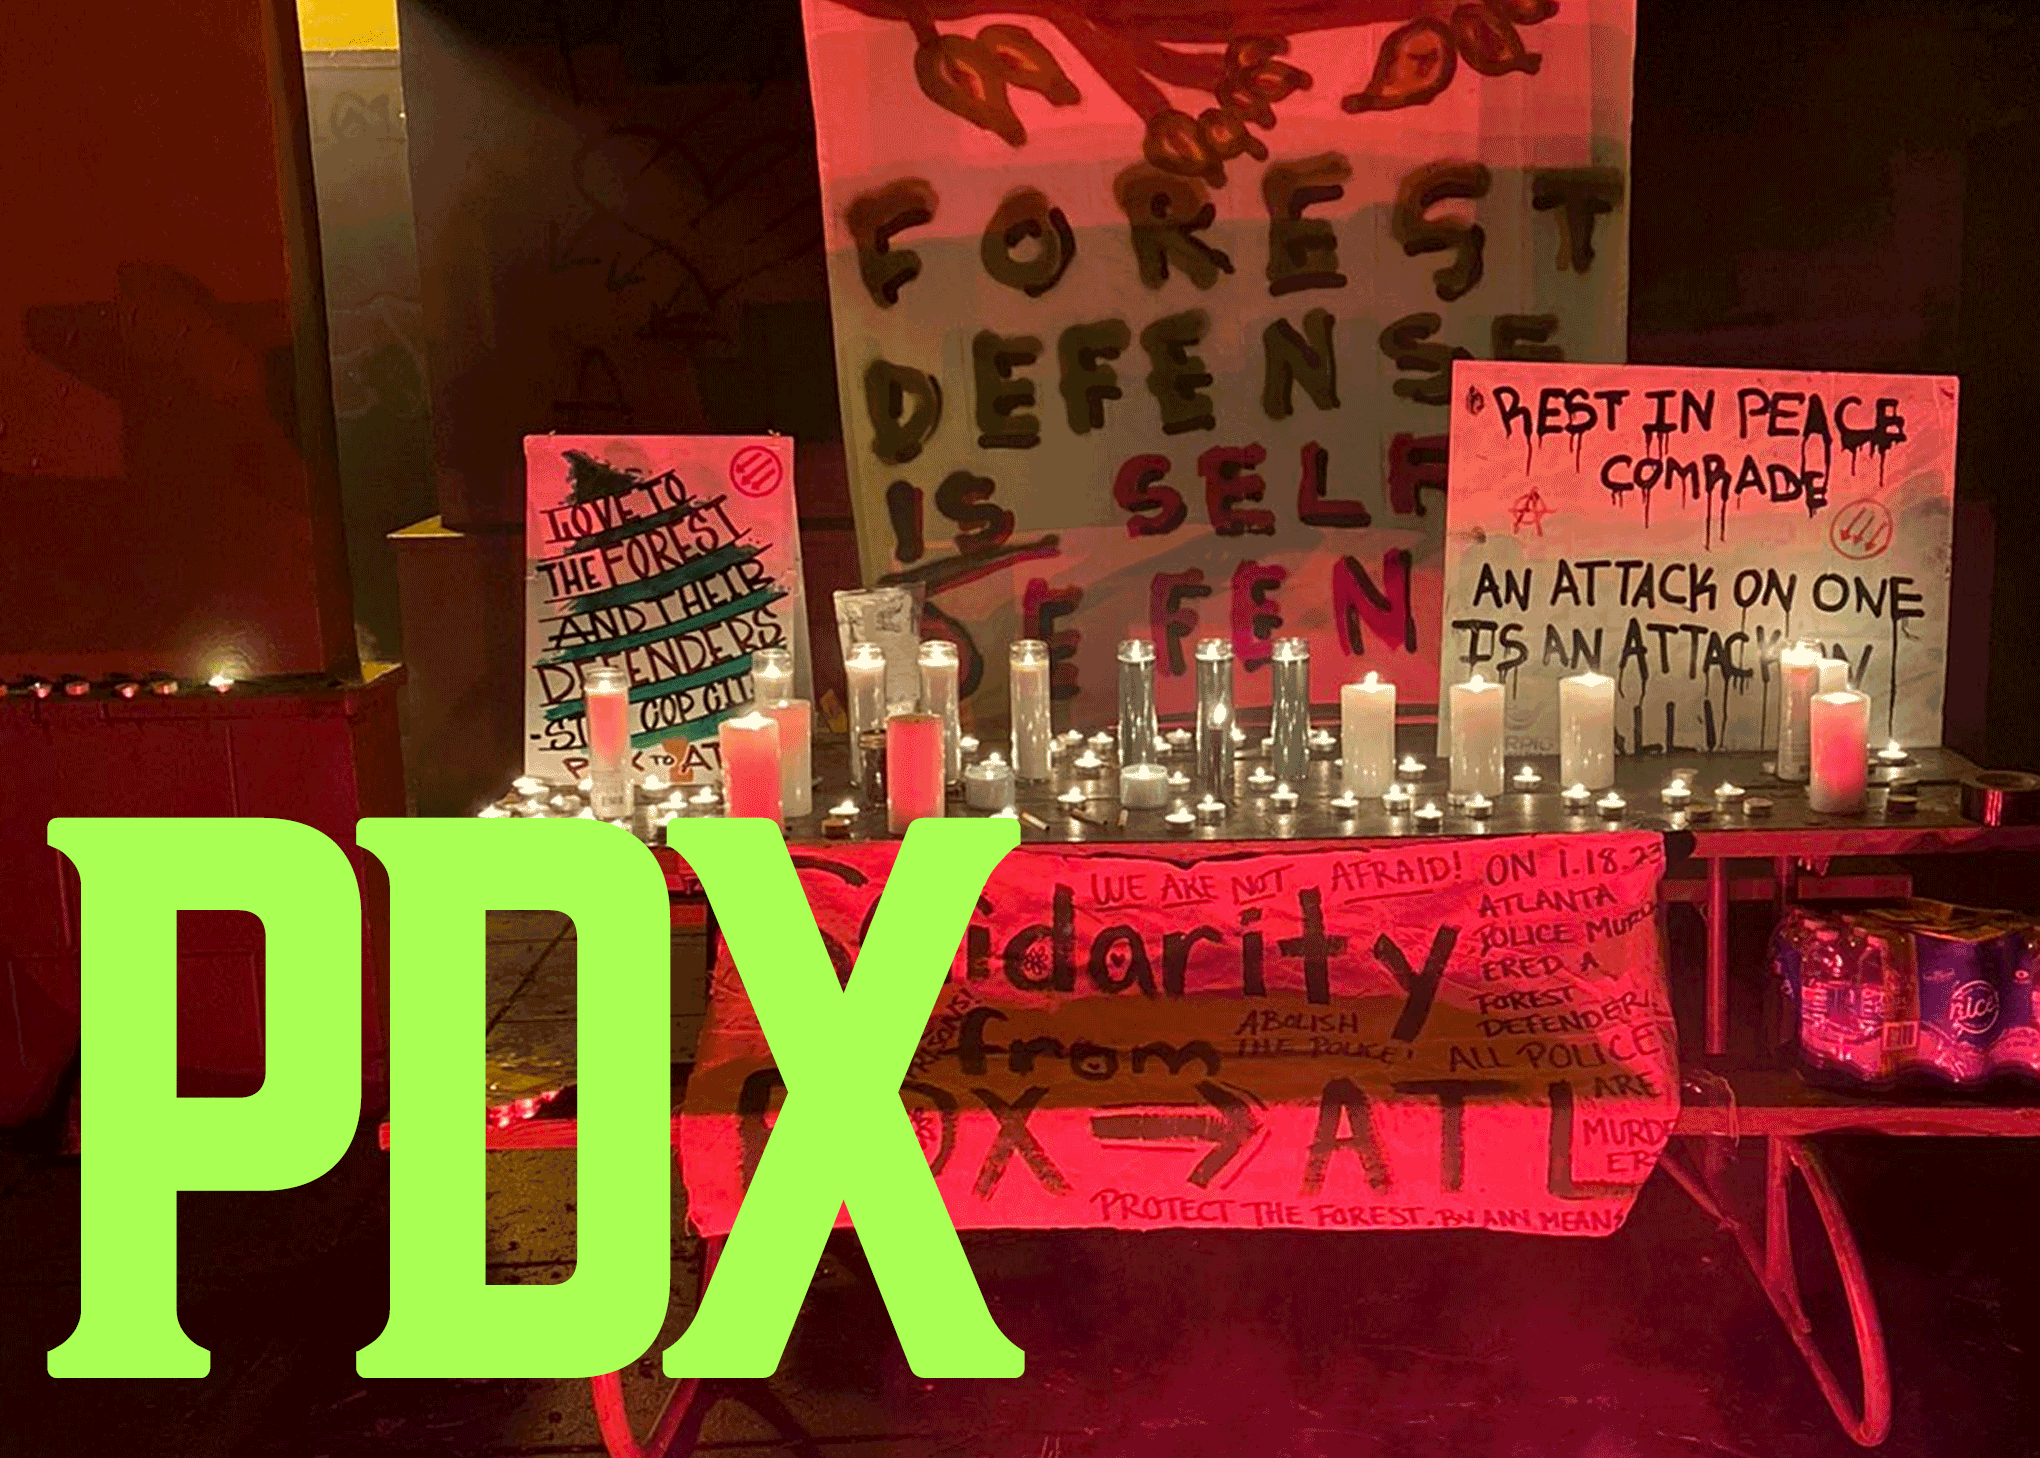 Three signs and a banner are lit in red on a picnic table filled with candles. The first sign is styled as a tree and states "LOVE TO THE FOREST AND THEIR DEFENDERS PDX TO ATL. The sign has a red three-arrows symbol in a circle. The second sign says "FOREST DEFENSE IS SELF DEFENSE" in green and red letters. The top of the sign is a tree branch. The third sign says "Rest in peace comrade, an attack on one is an attack on all!" A red anarchist circle-A symbol and a red three-arrows symbol adorn the sides of the sign. The banner is laid on the seat of the picnic table and has numerous messages on it. The largest states "Solidarity from PDX (arrow) ATL. The banner also states the following messages in smaller text in the margins of the larger message: "We are not afraid!" "Abolish the police!" "Protect the forest by any means." "All police are murderers." "On 1.18.23 Atlanta Police murdered a forest defender!" In the bottom left corners, "PDX" is spelled in green letters.